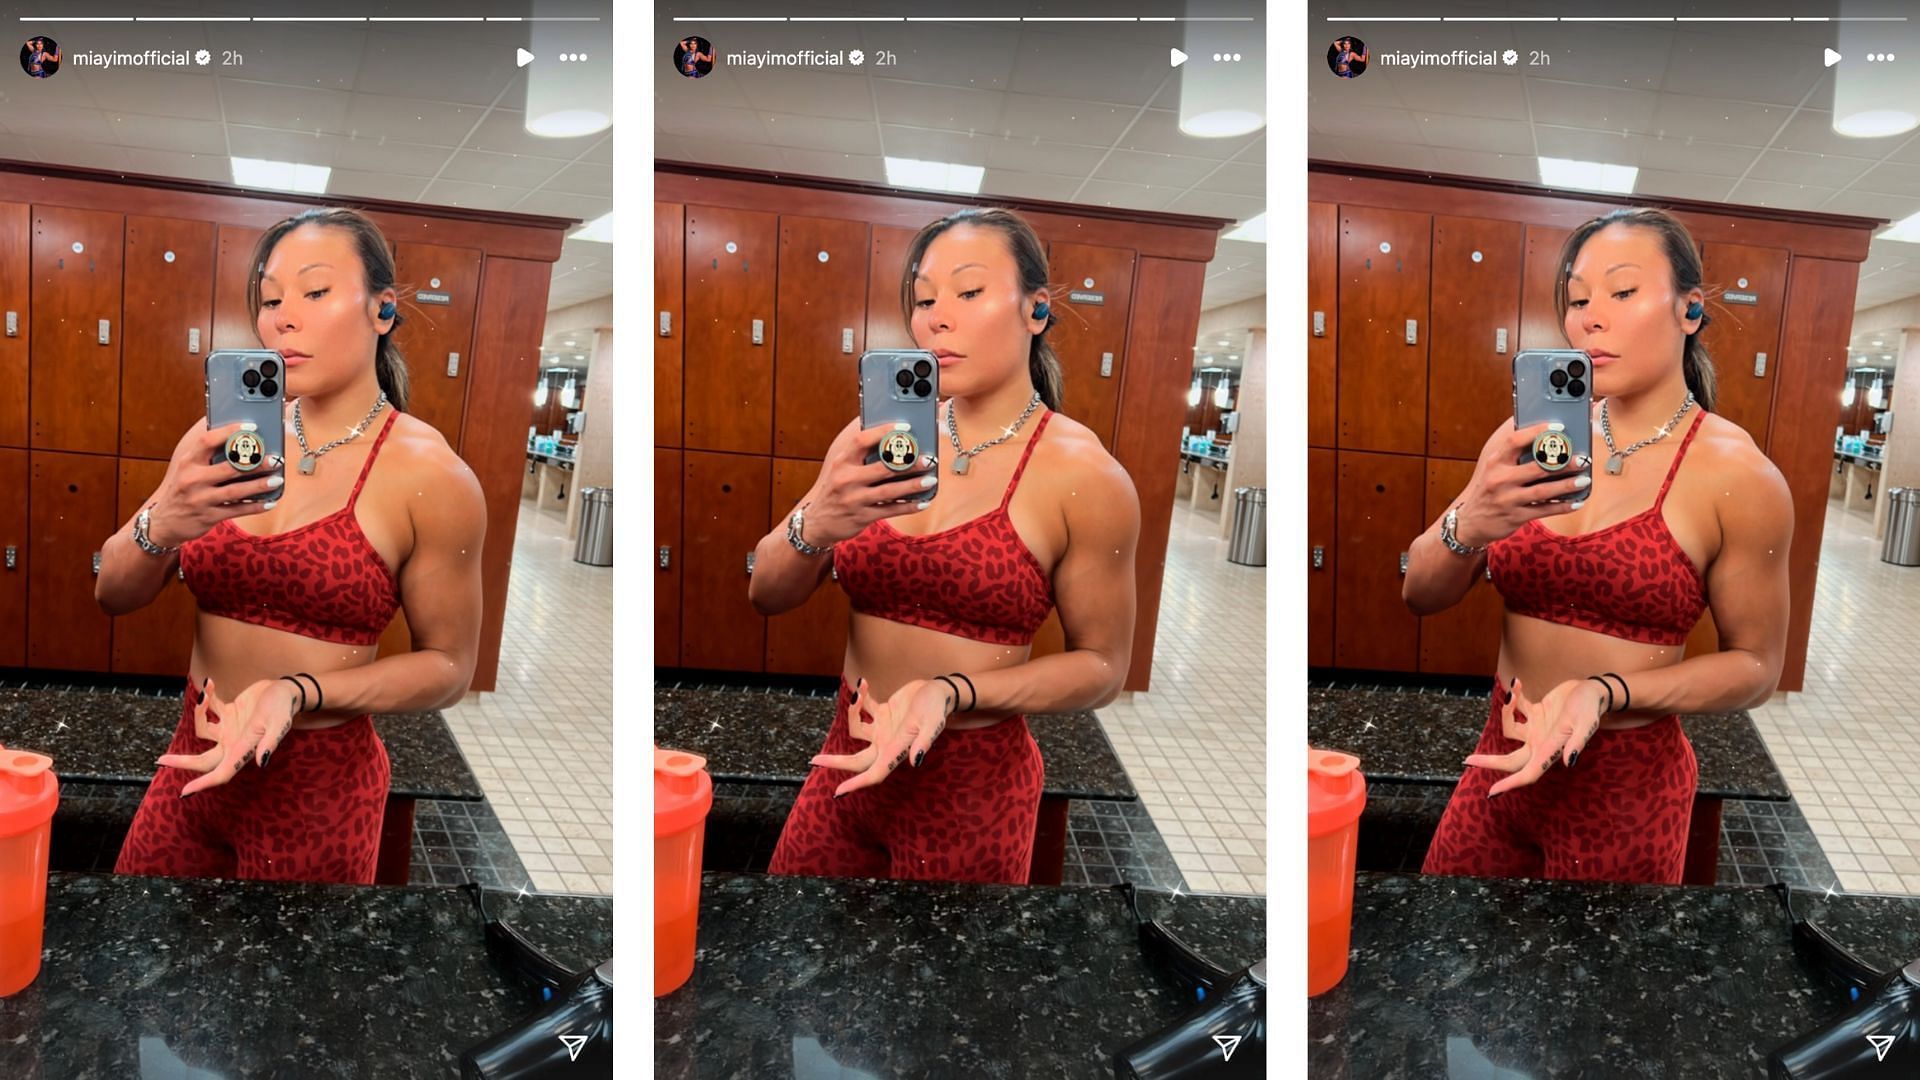 Yim shares an update on Instagram ahead of SmackDown.